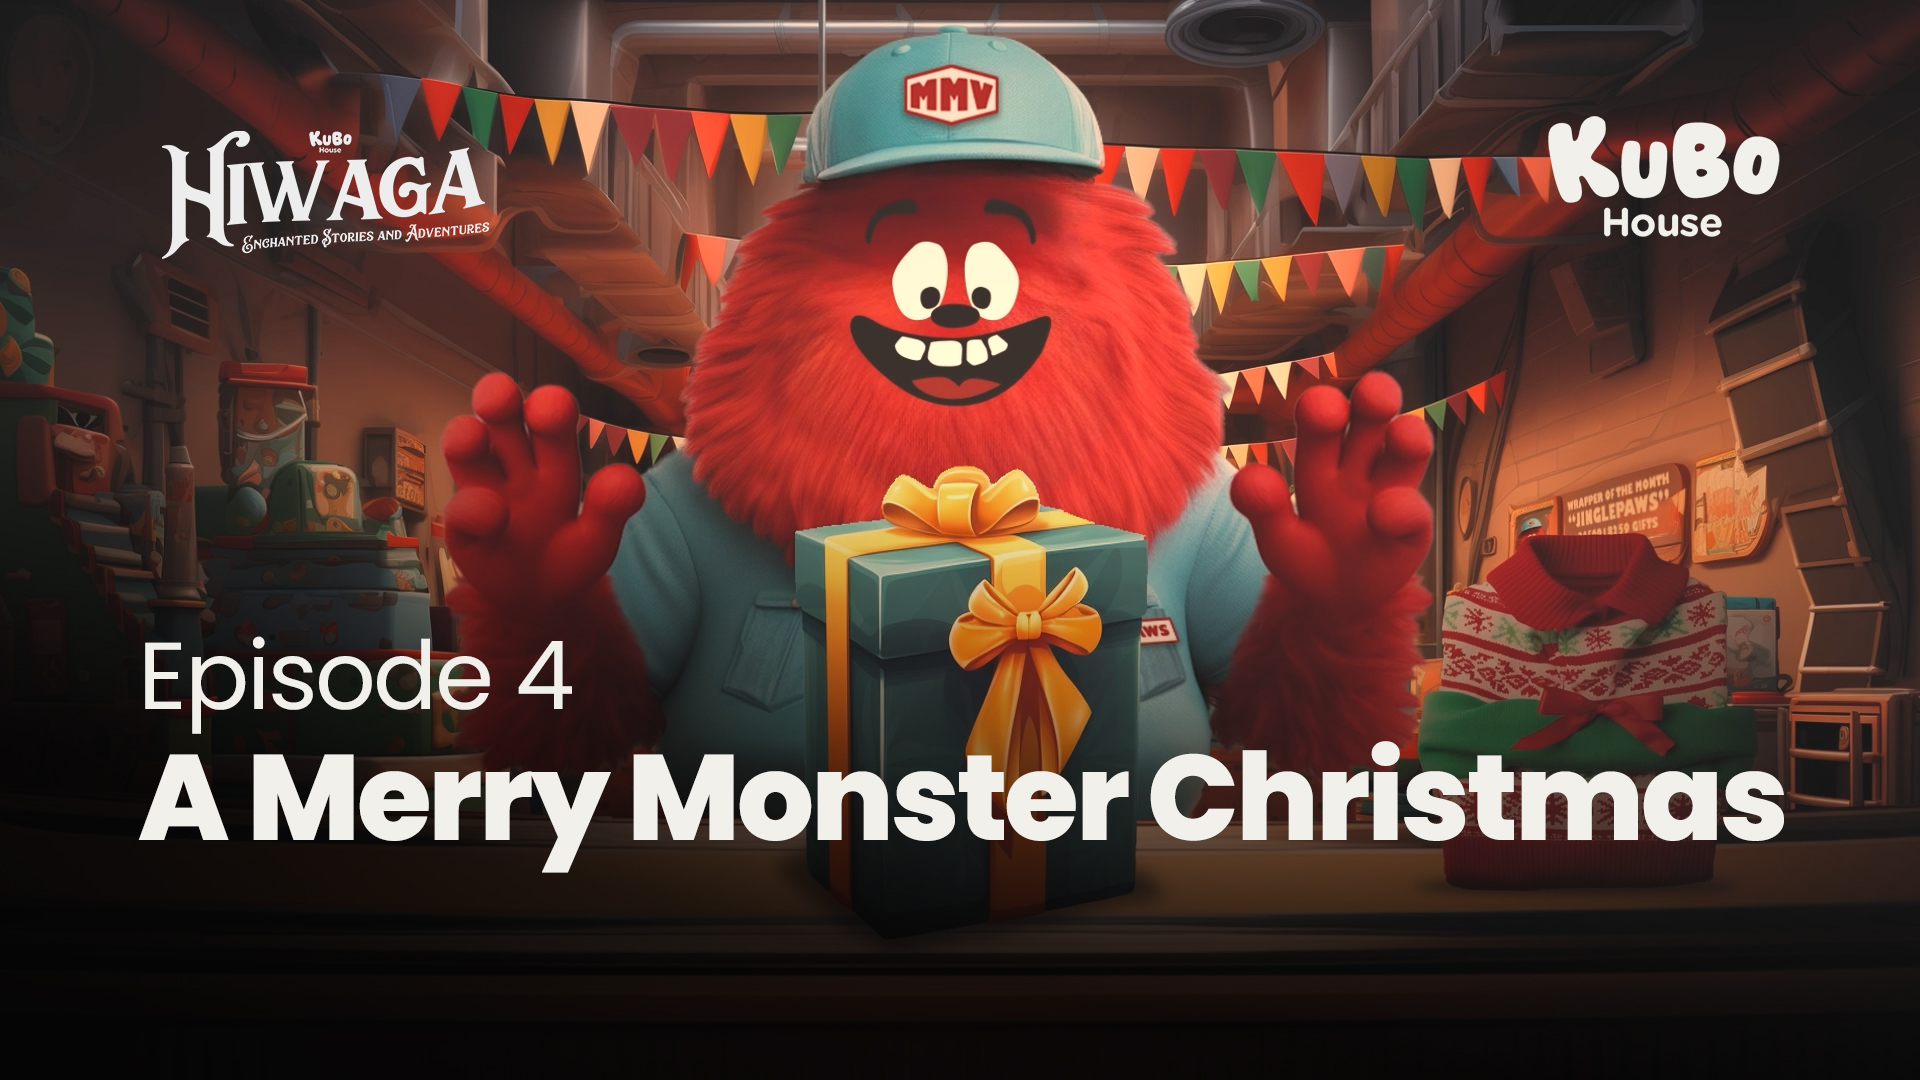 Hiwaga: Enchanted Stories and Adventures – Episode 4 “A Merry Monster Christmas”